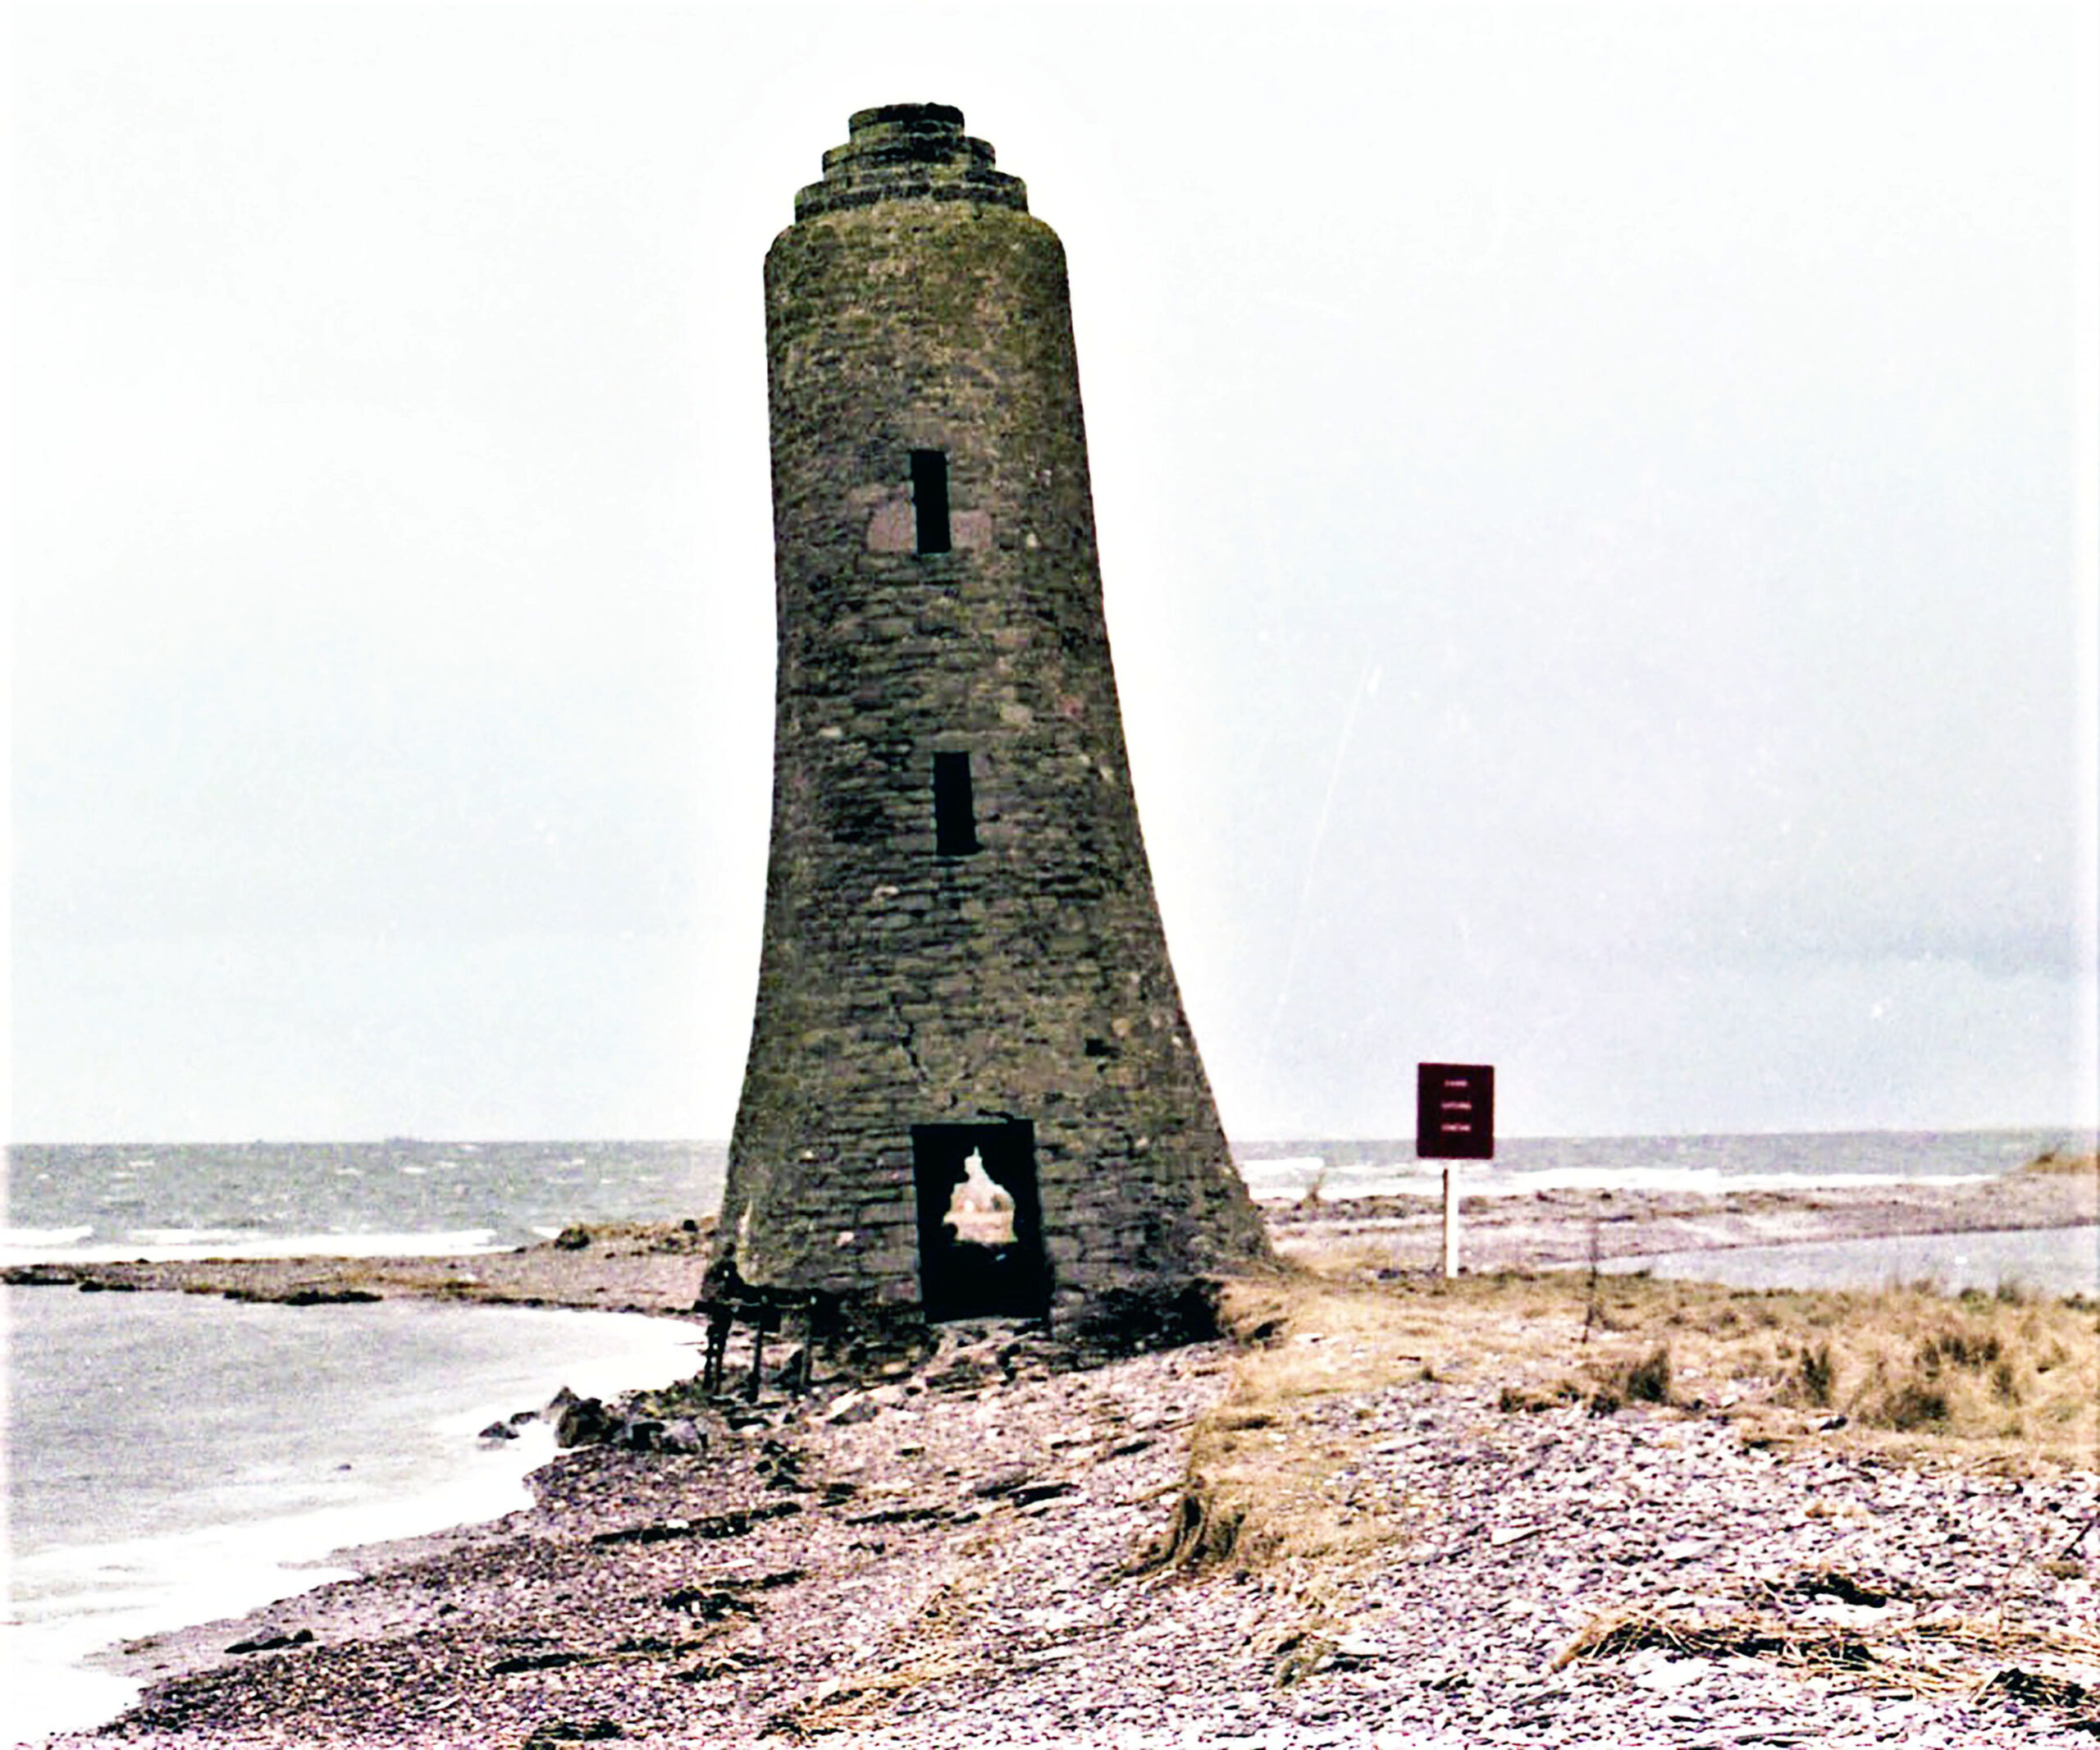 Tayport Heritage Trail - Board 19 - Tower late 1970s prior to demolition